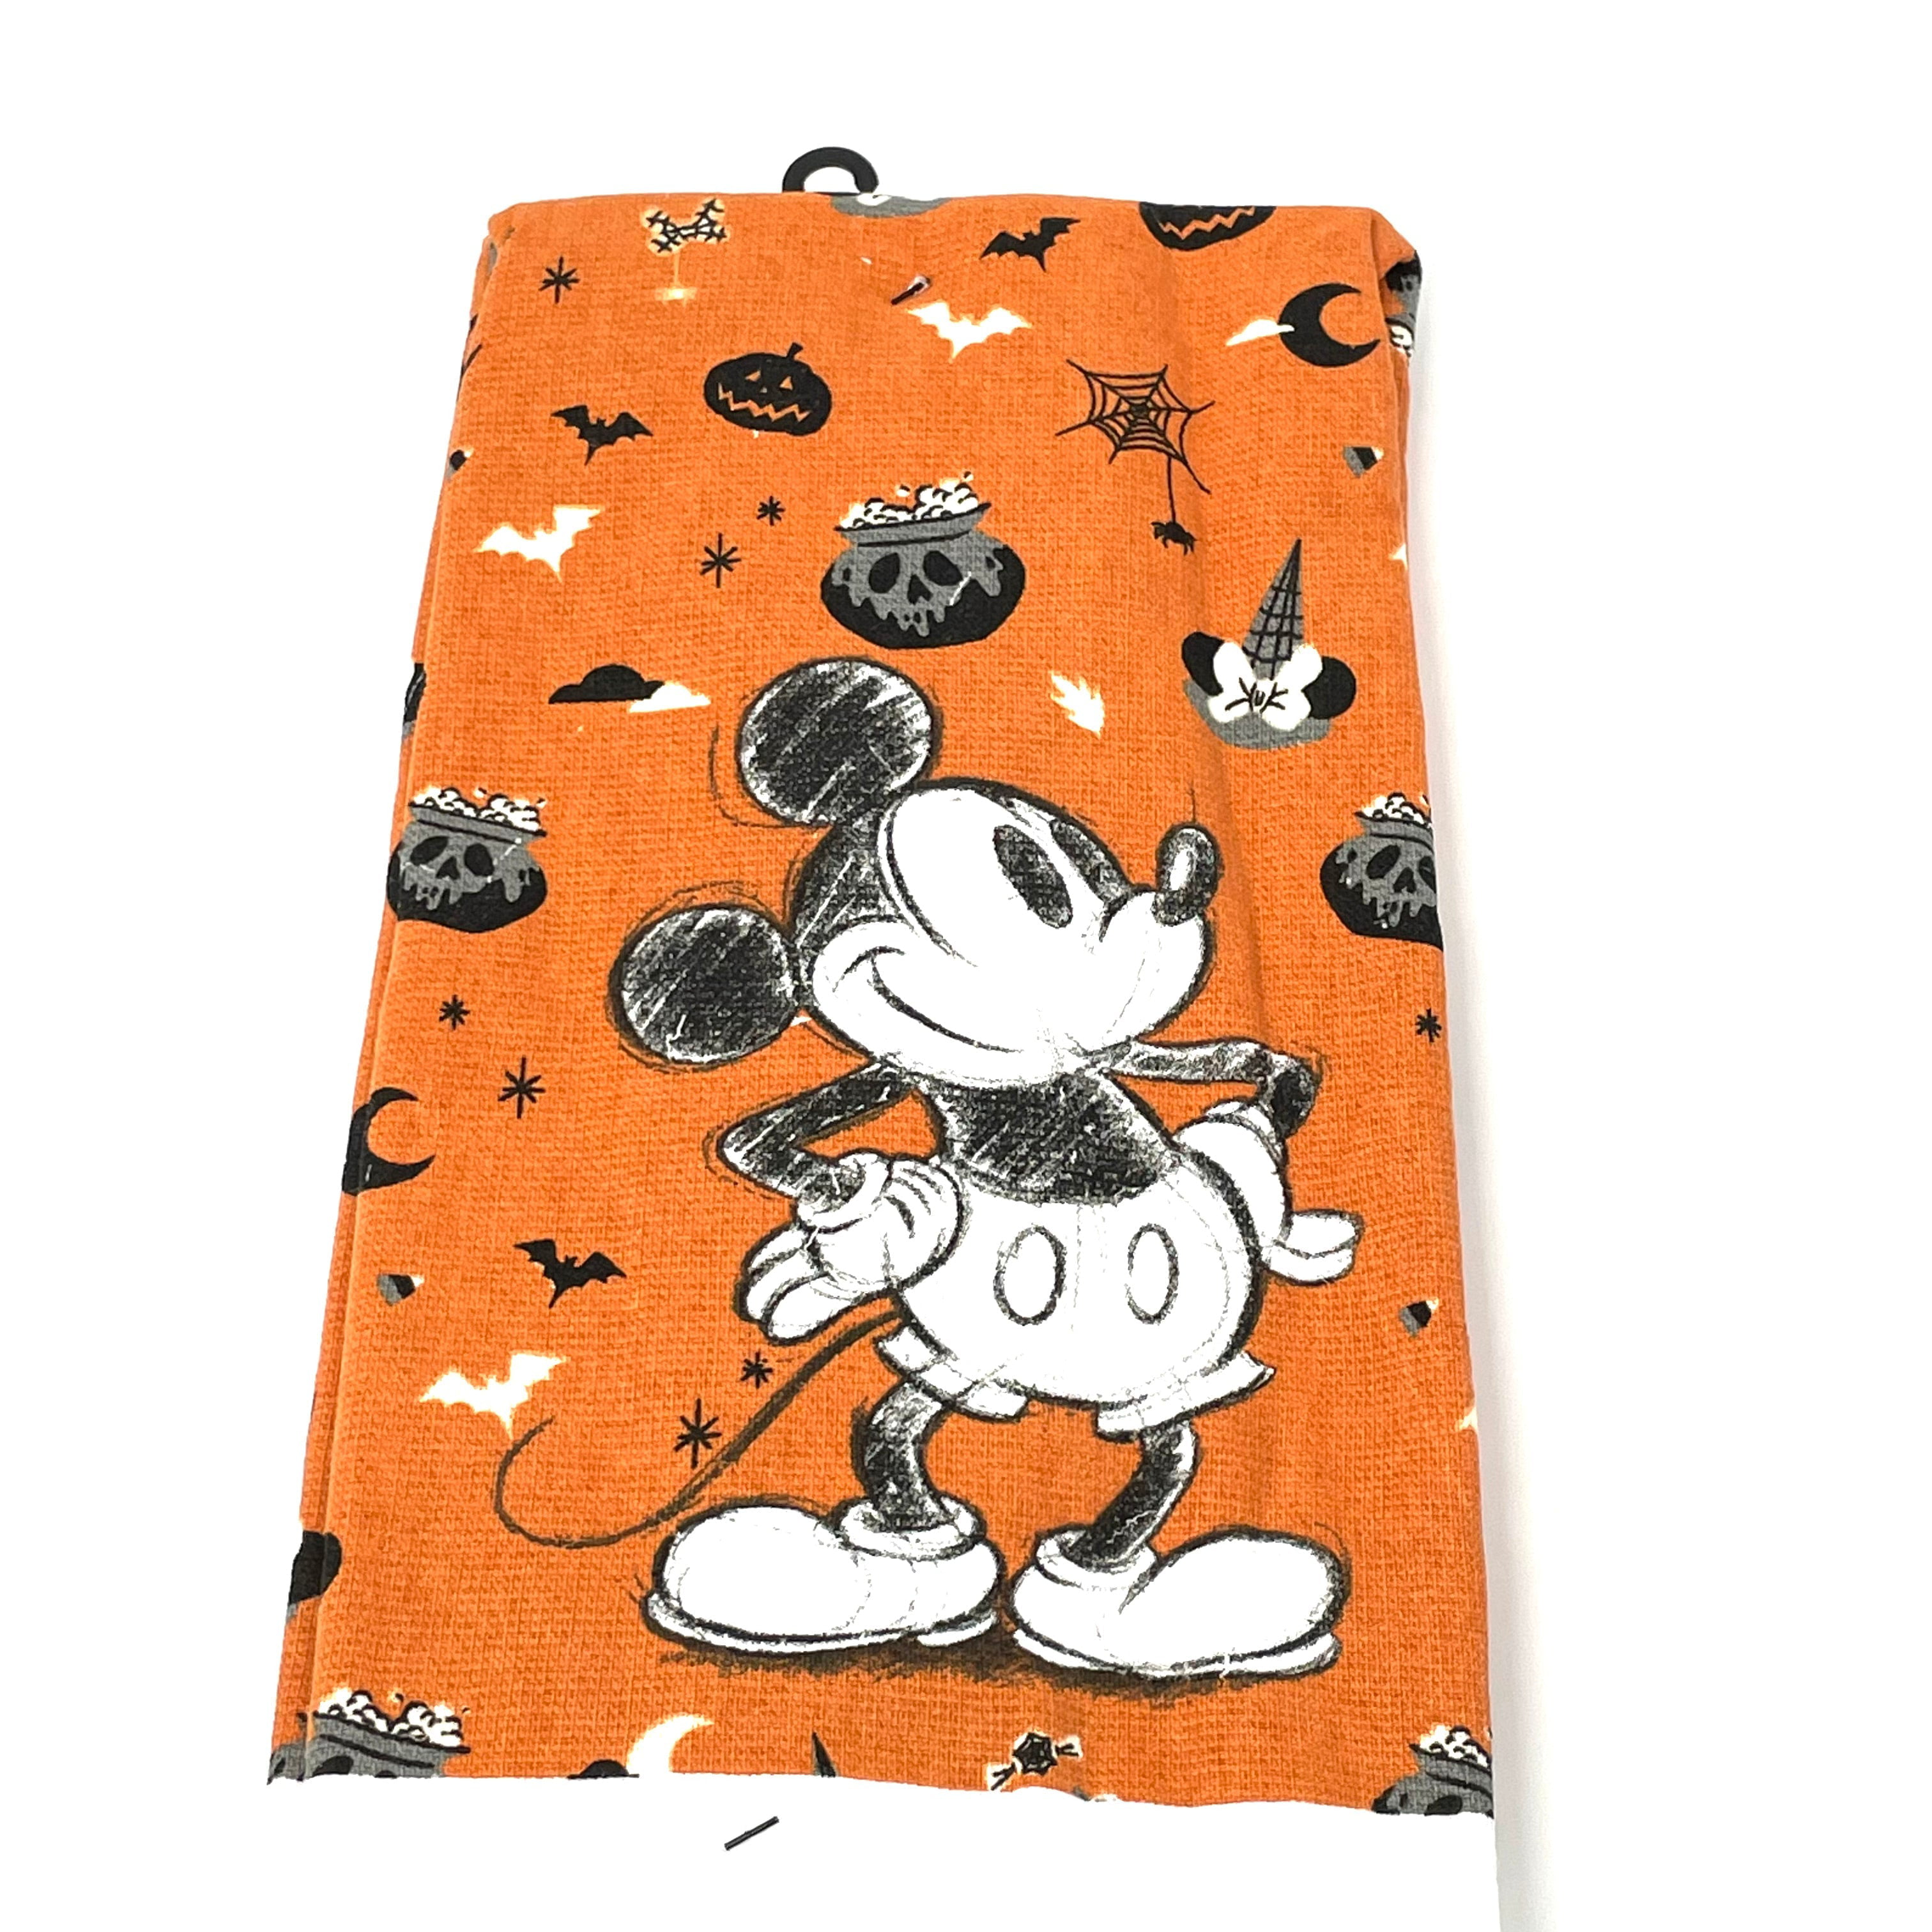  Disney Mickey Mouse Mickeys Really Swell Diner Dish Towel Set :  Home & Kitchen